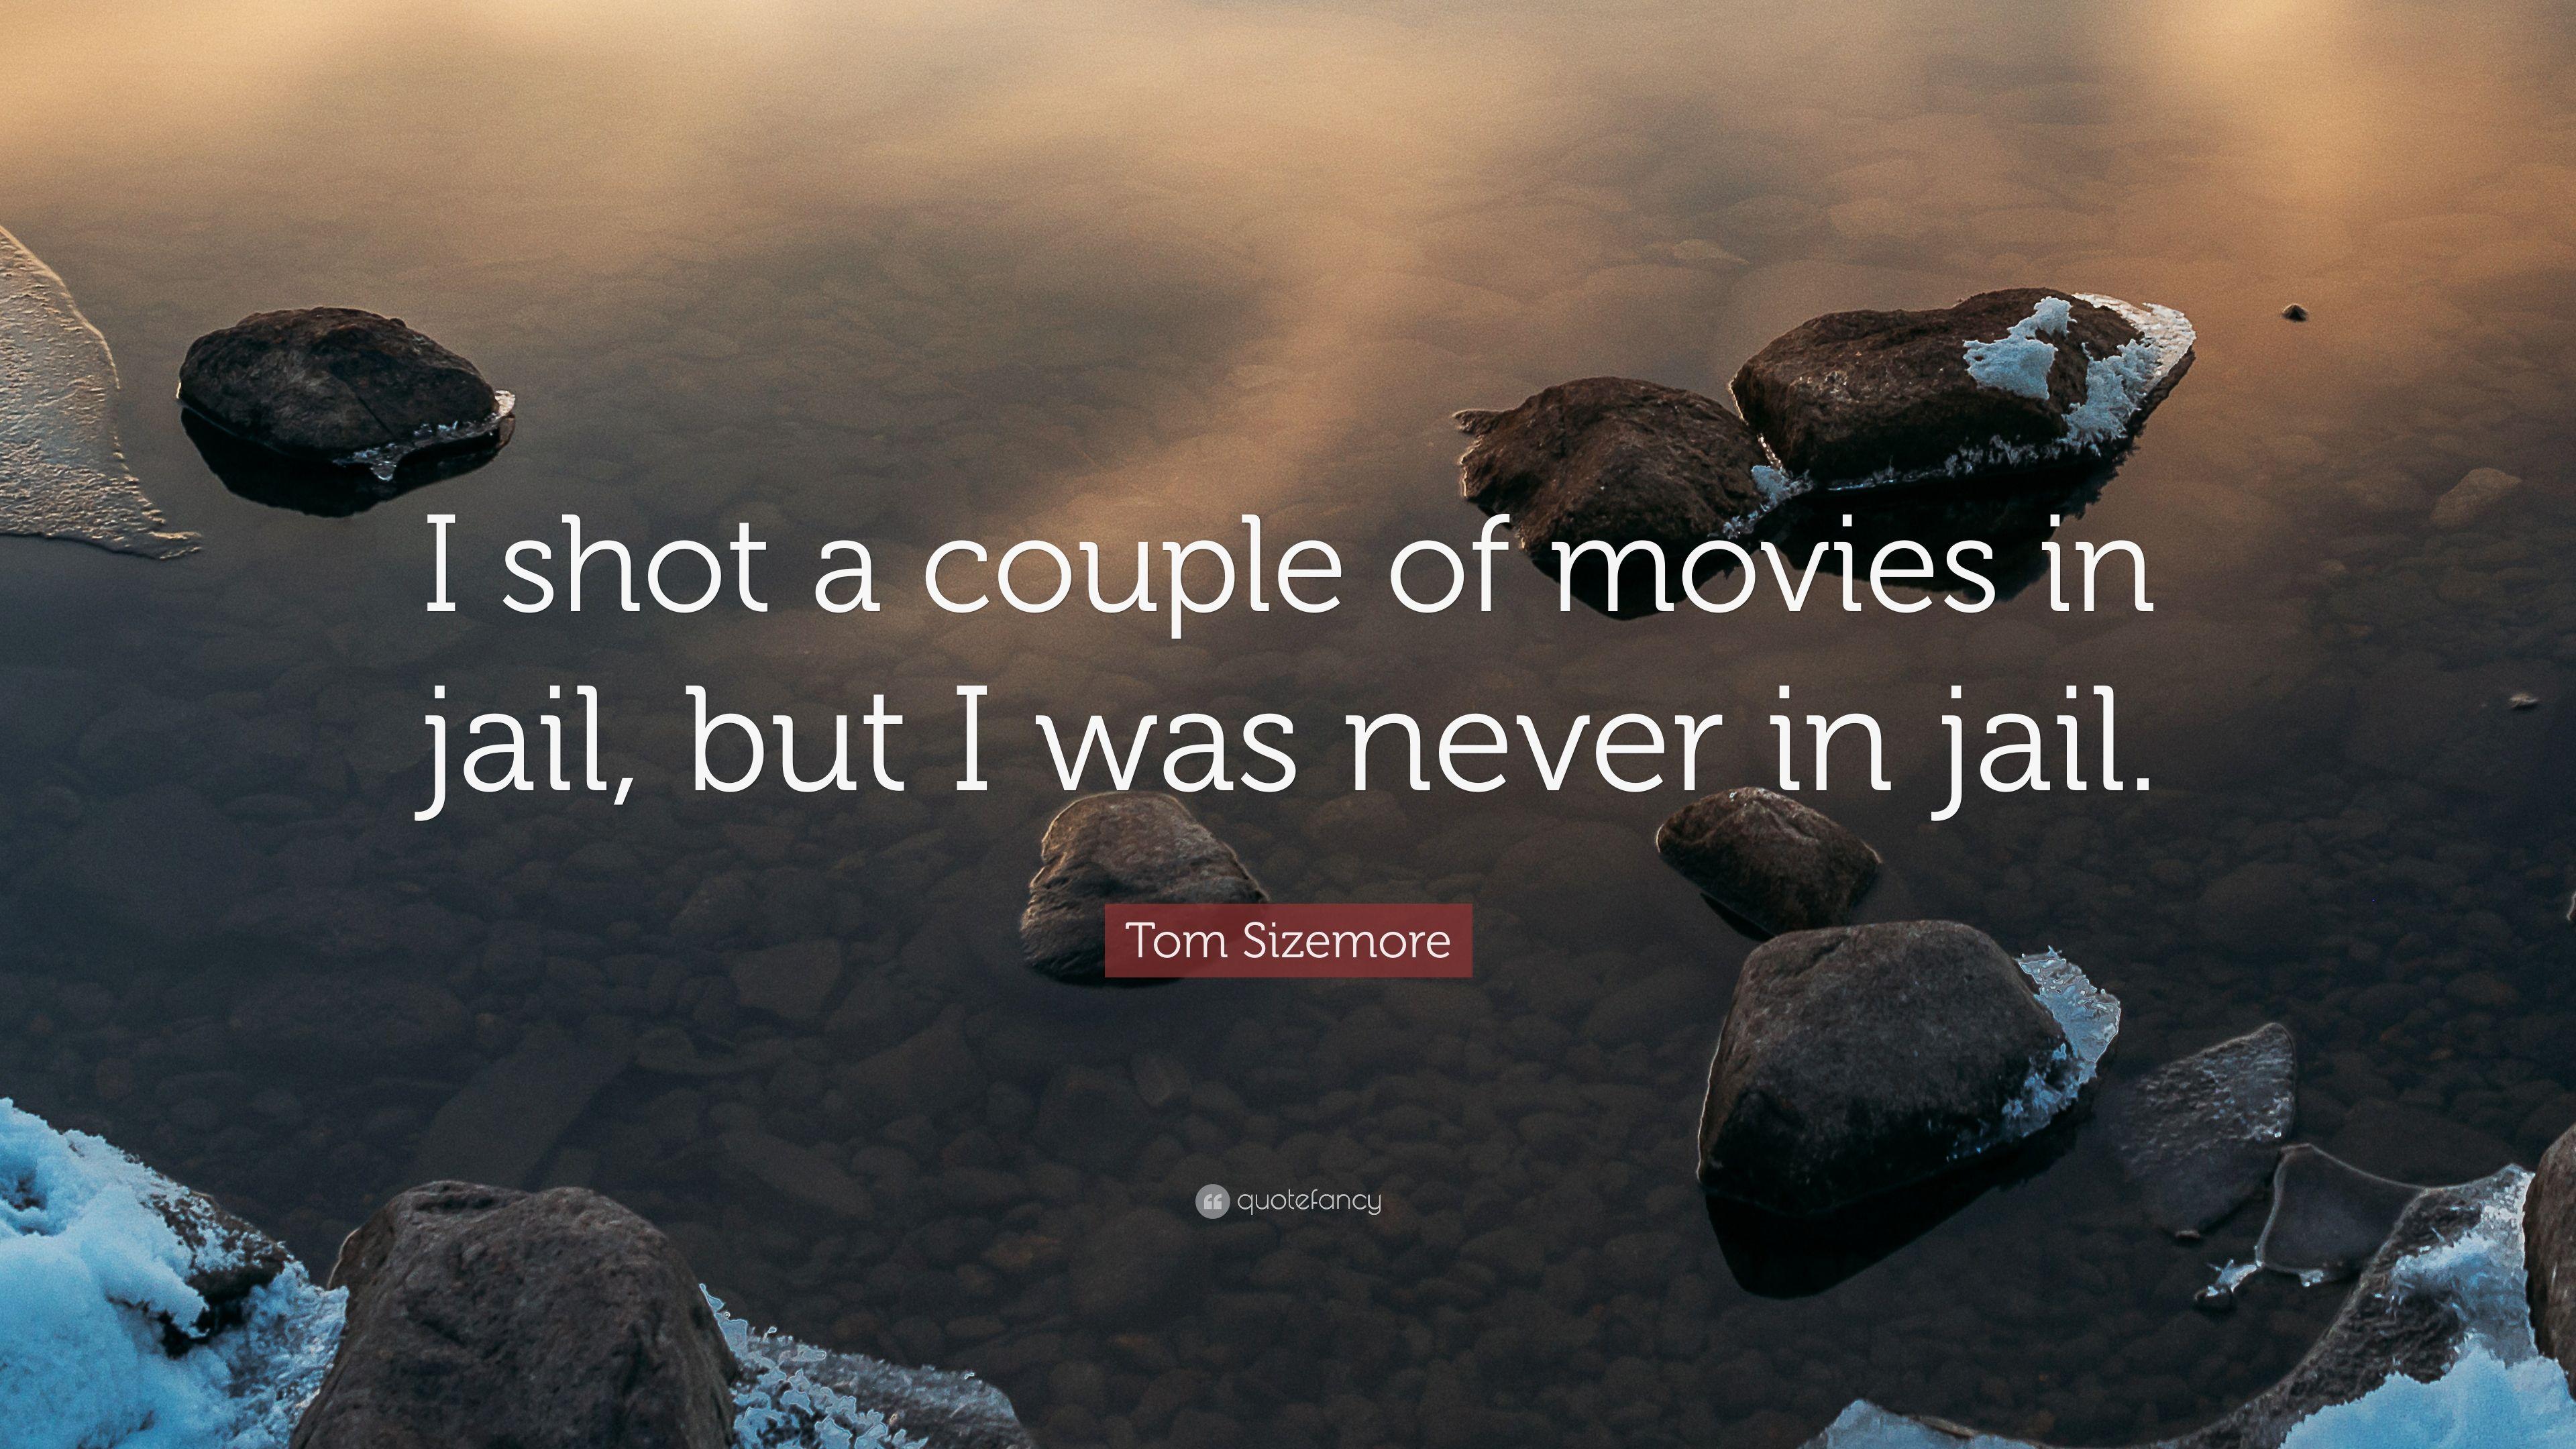 Tom Sizemore Quote: “I shot a couple of movies in jail, but I was